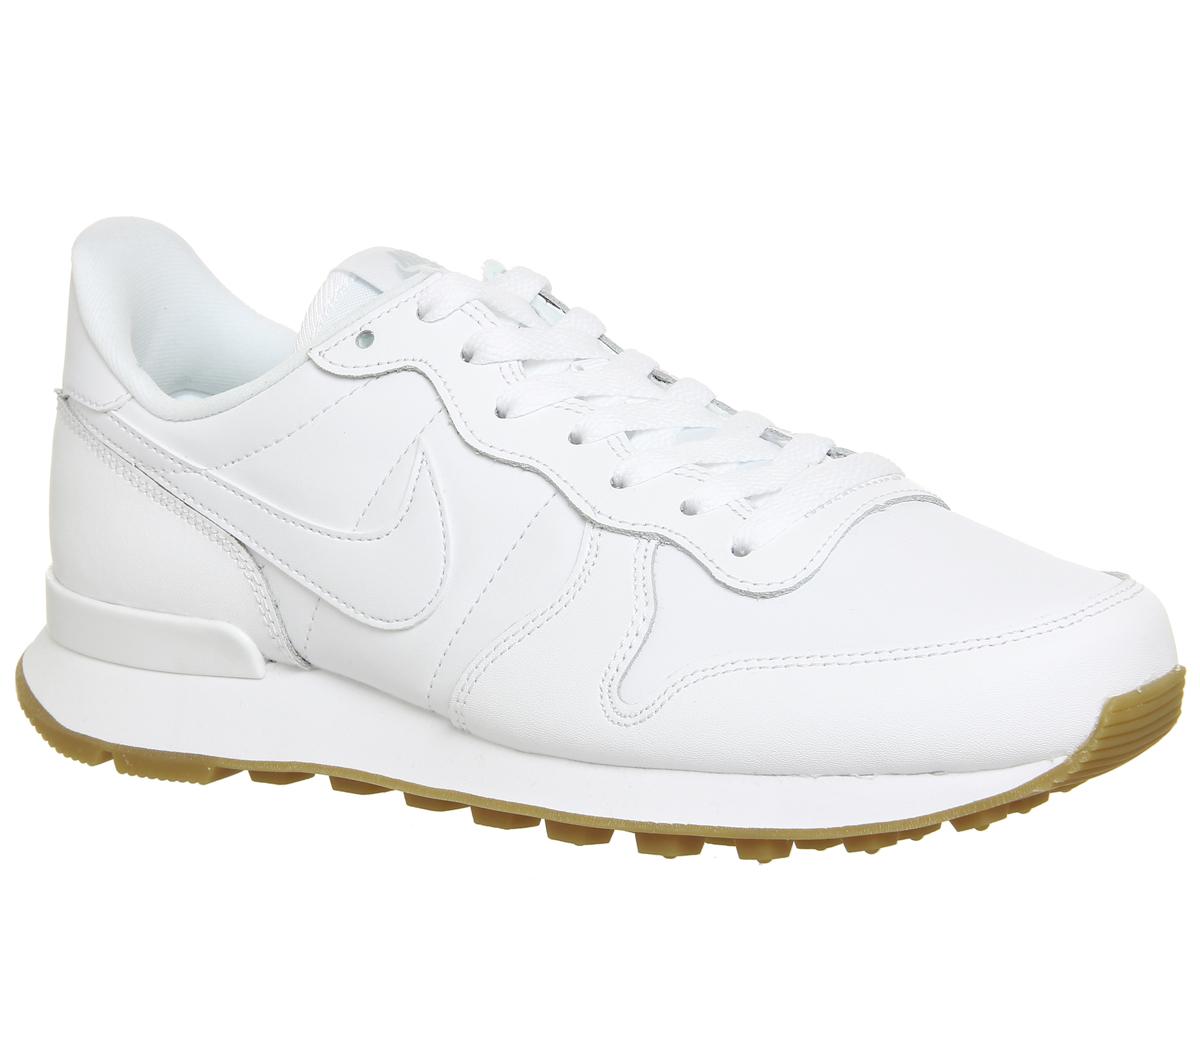 Nike Internationalist Leather Online Sale, UP TO 60% OFF